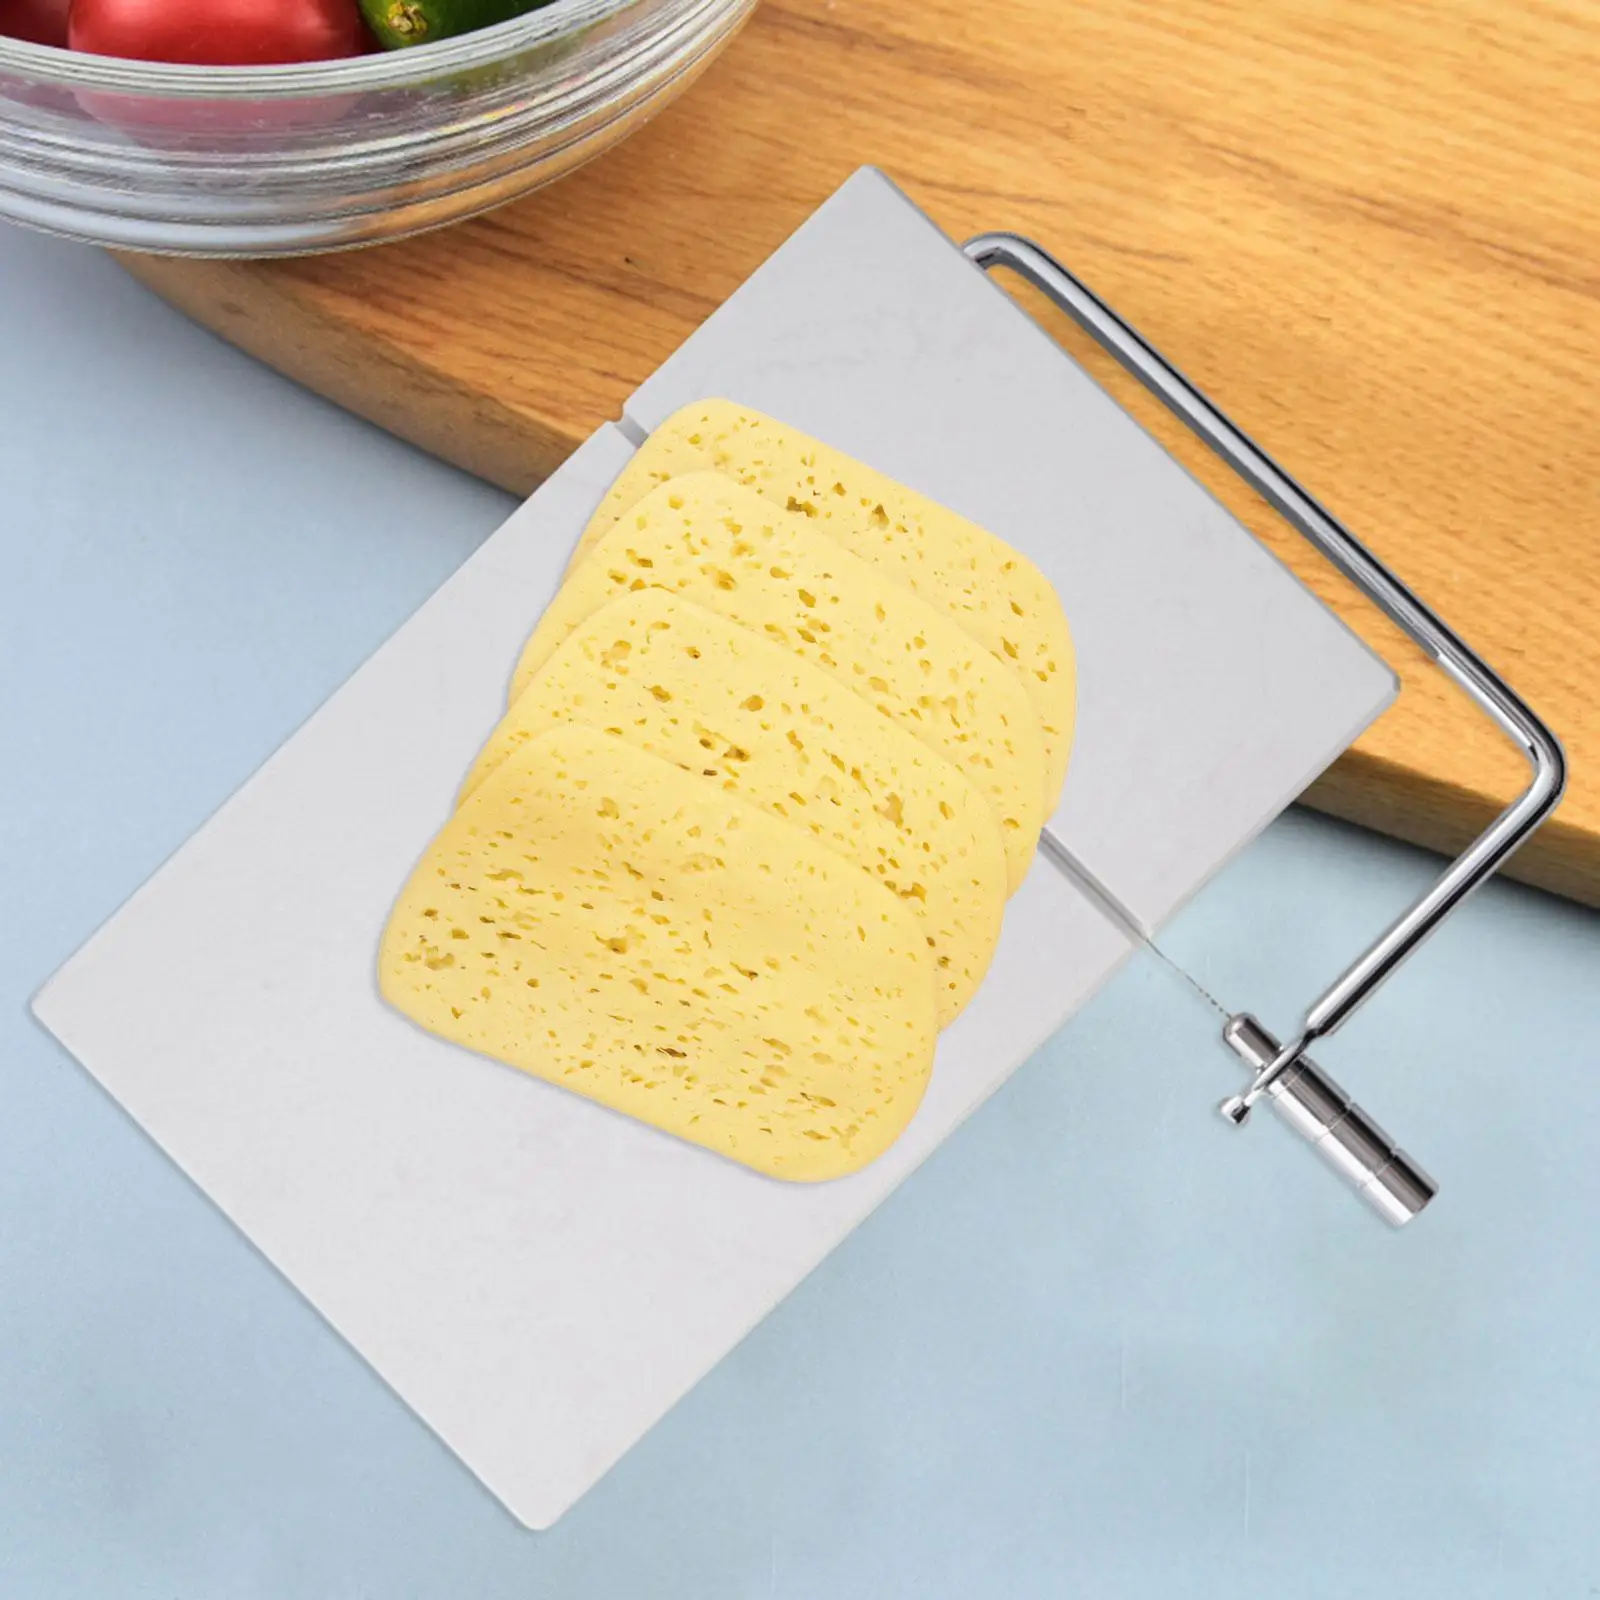 Marble Cheese Slicer Cutter Board Durable Adjustable Thickness Food Slicer for Handcrafted Soaps Dessert Vegetables Pastry Bread